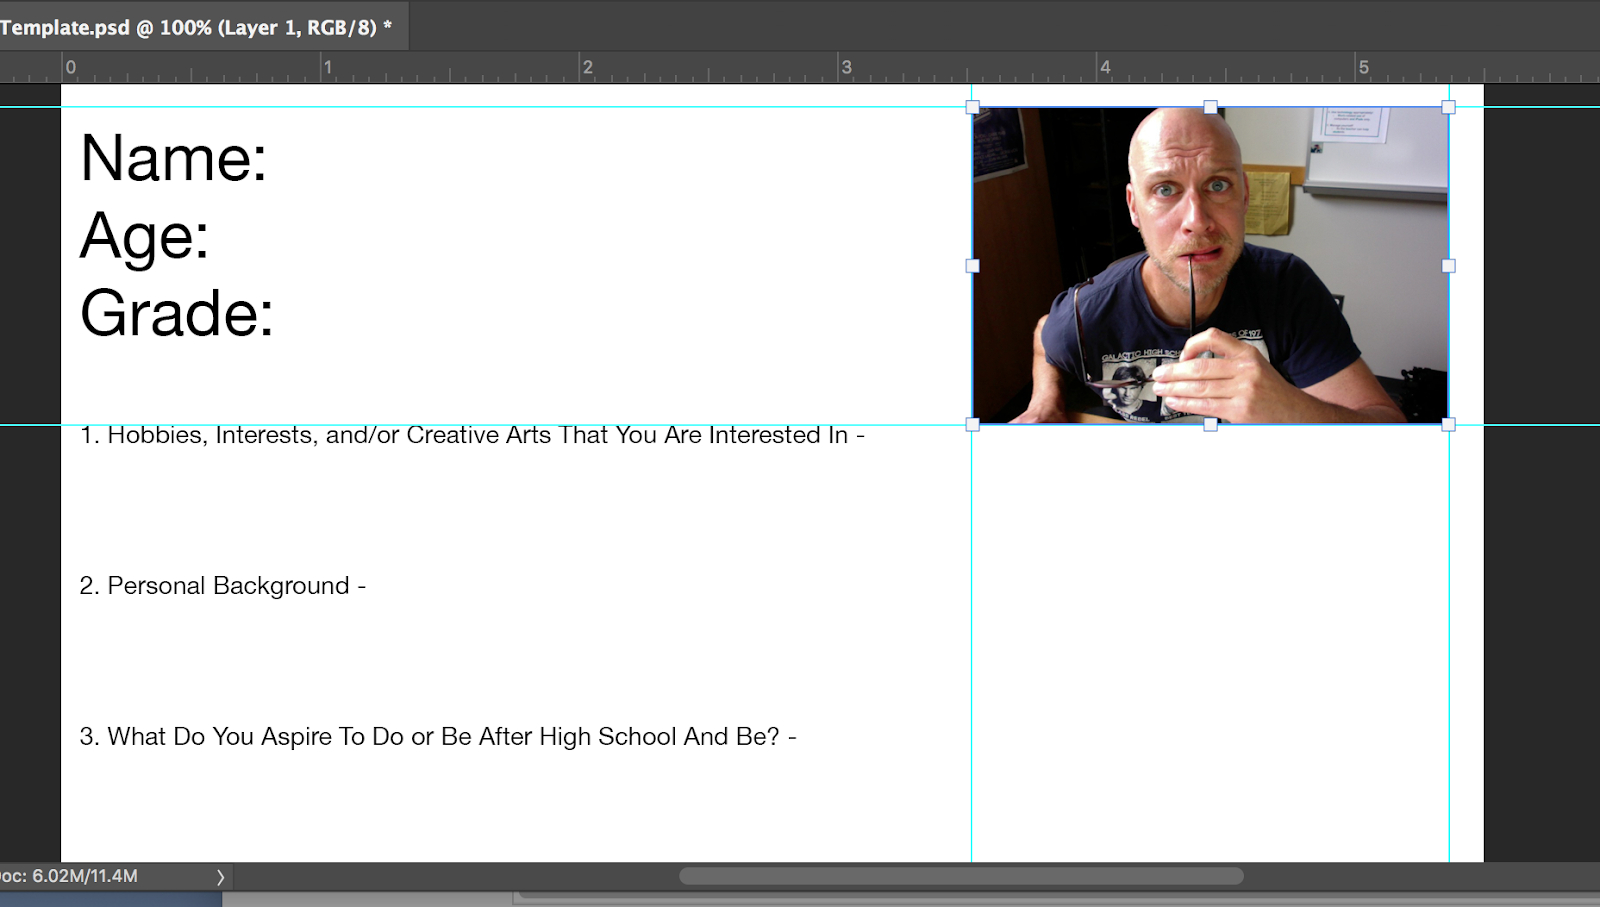 Working With Layers In Photoshop Cc To Build Your Punkt Id Card Intended For High School Id Card Template